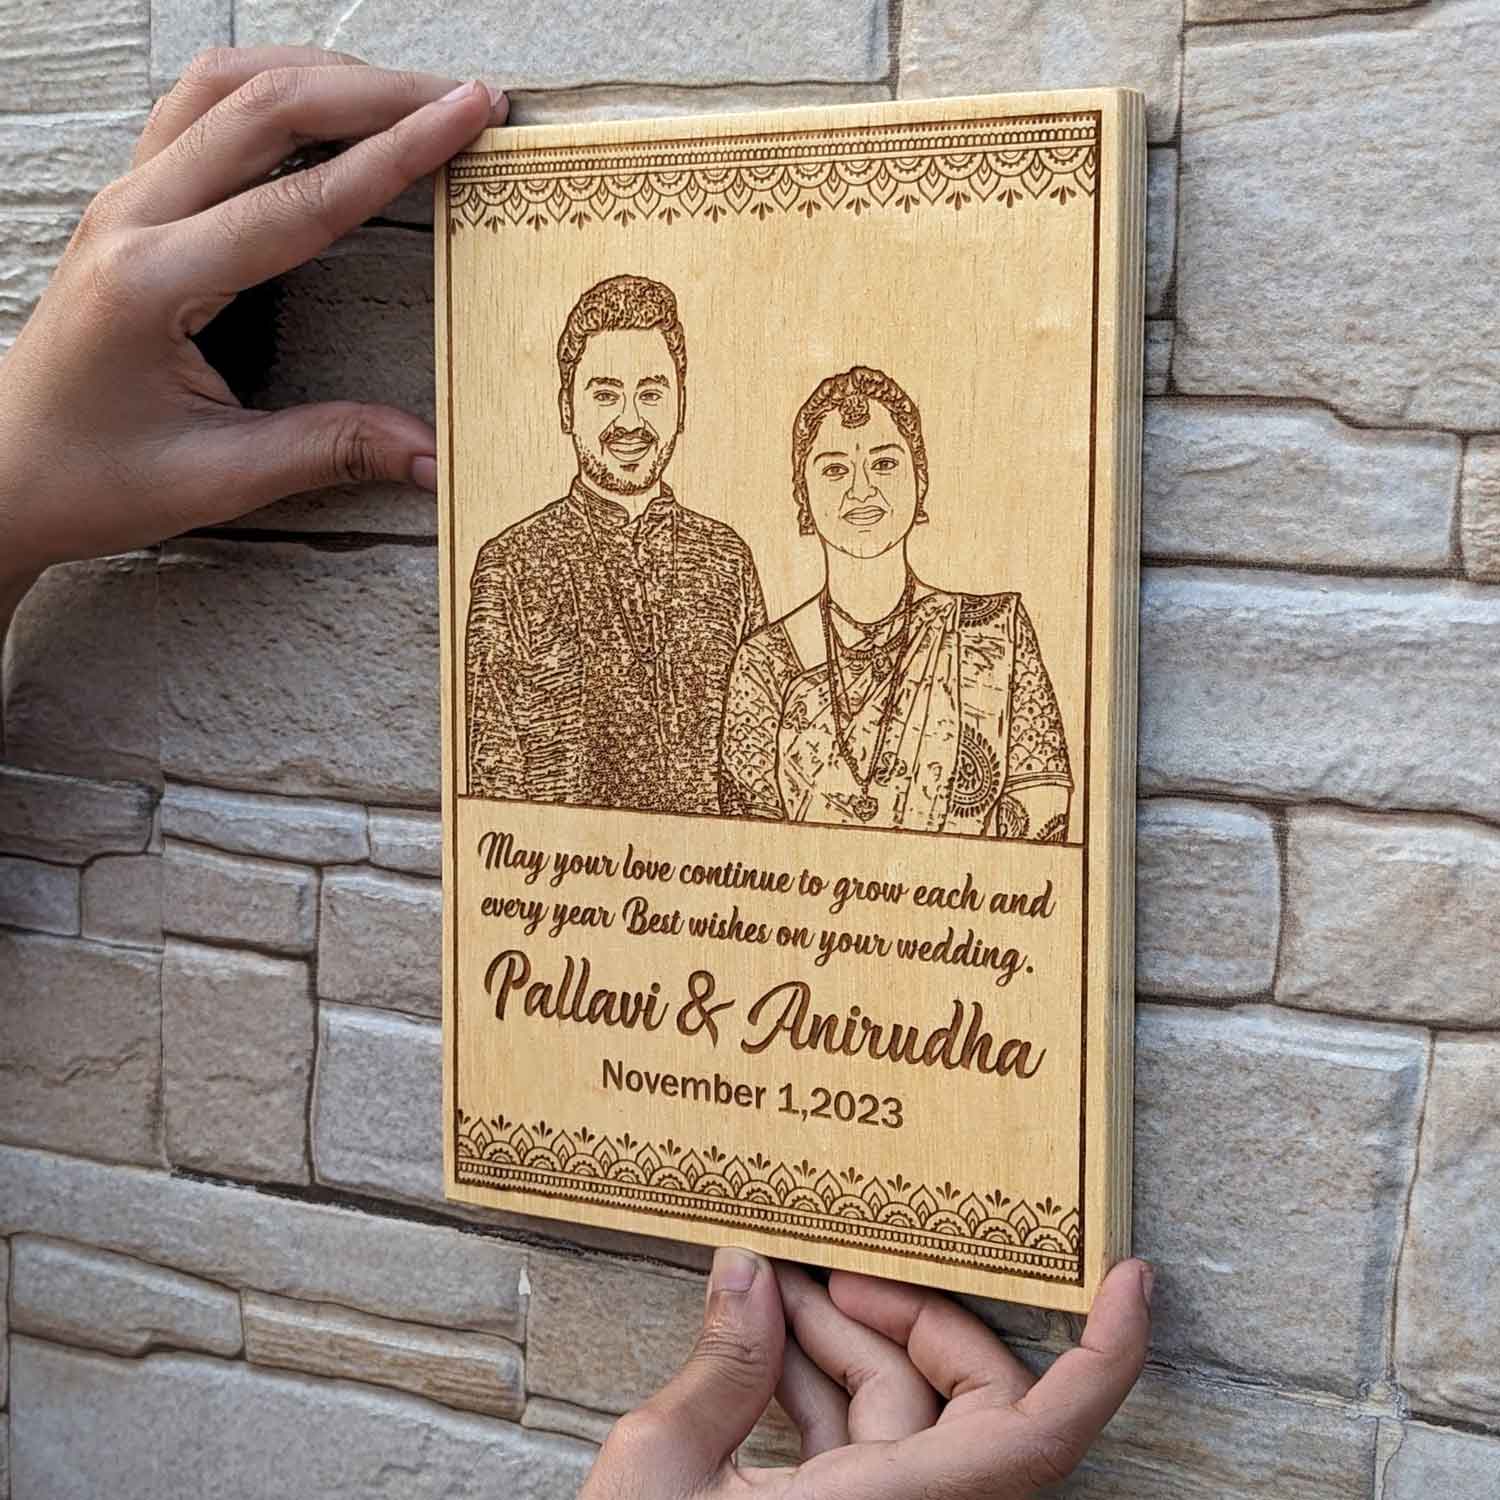 Wedding Wishes - Engraved Wooden Wedding Gift For A Lifetime of Love